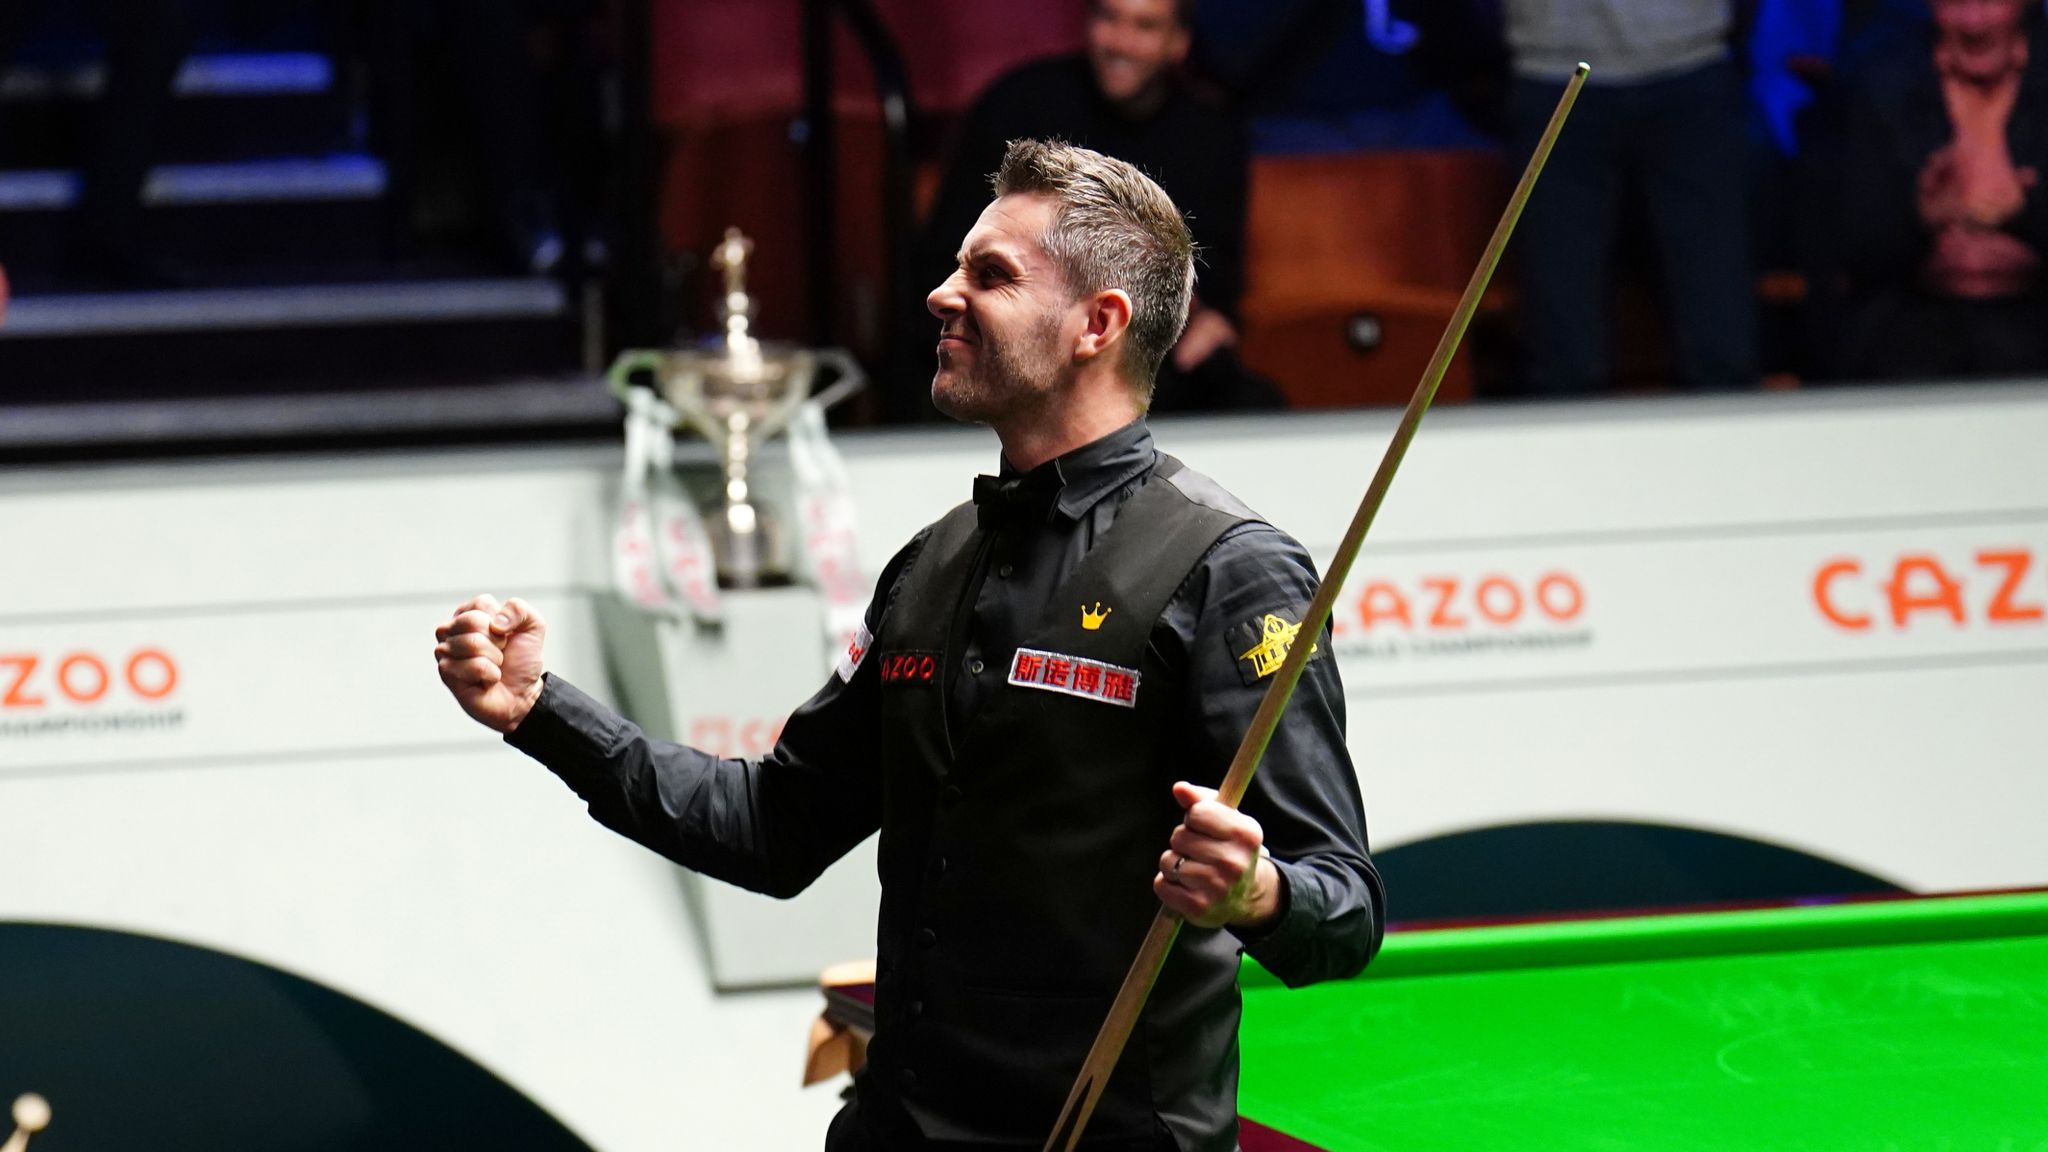 The 2023 World Snooker Championship – The Crucible Draw